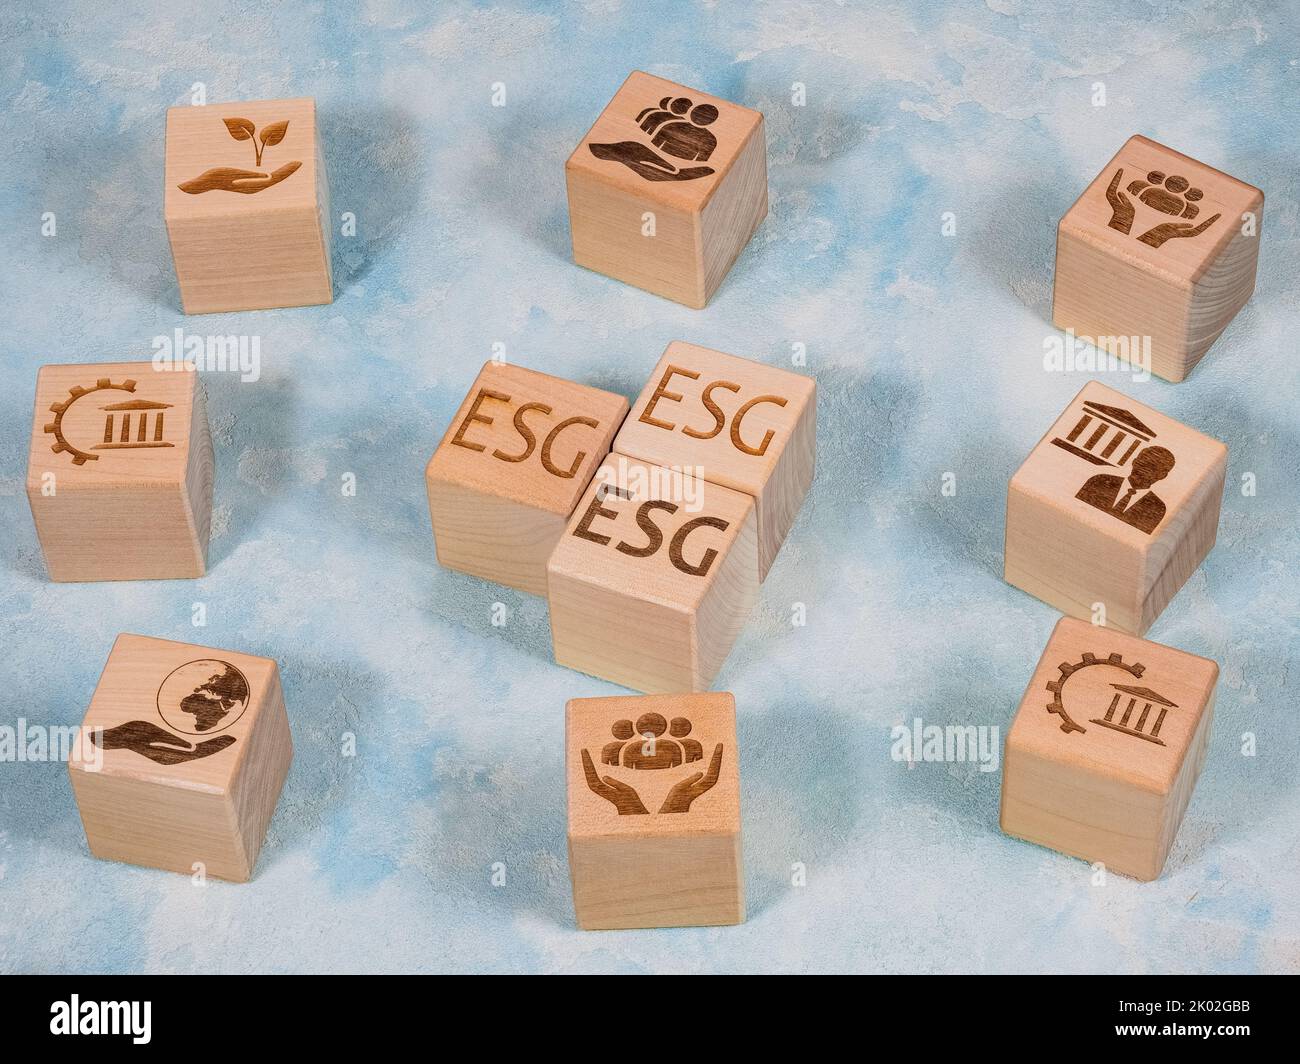 ESG text and symbols on wooden cubes as environmental conservation and renewable resource concept Stock Photo